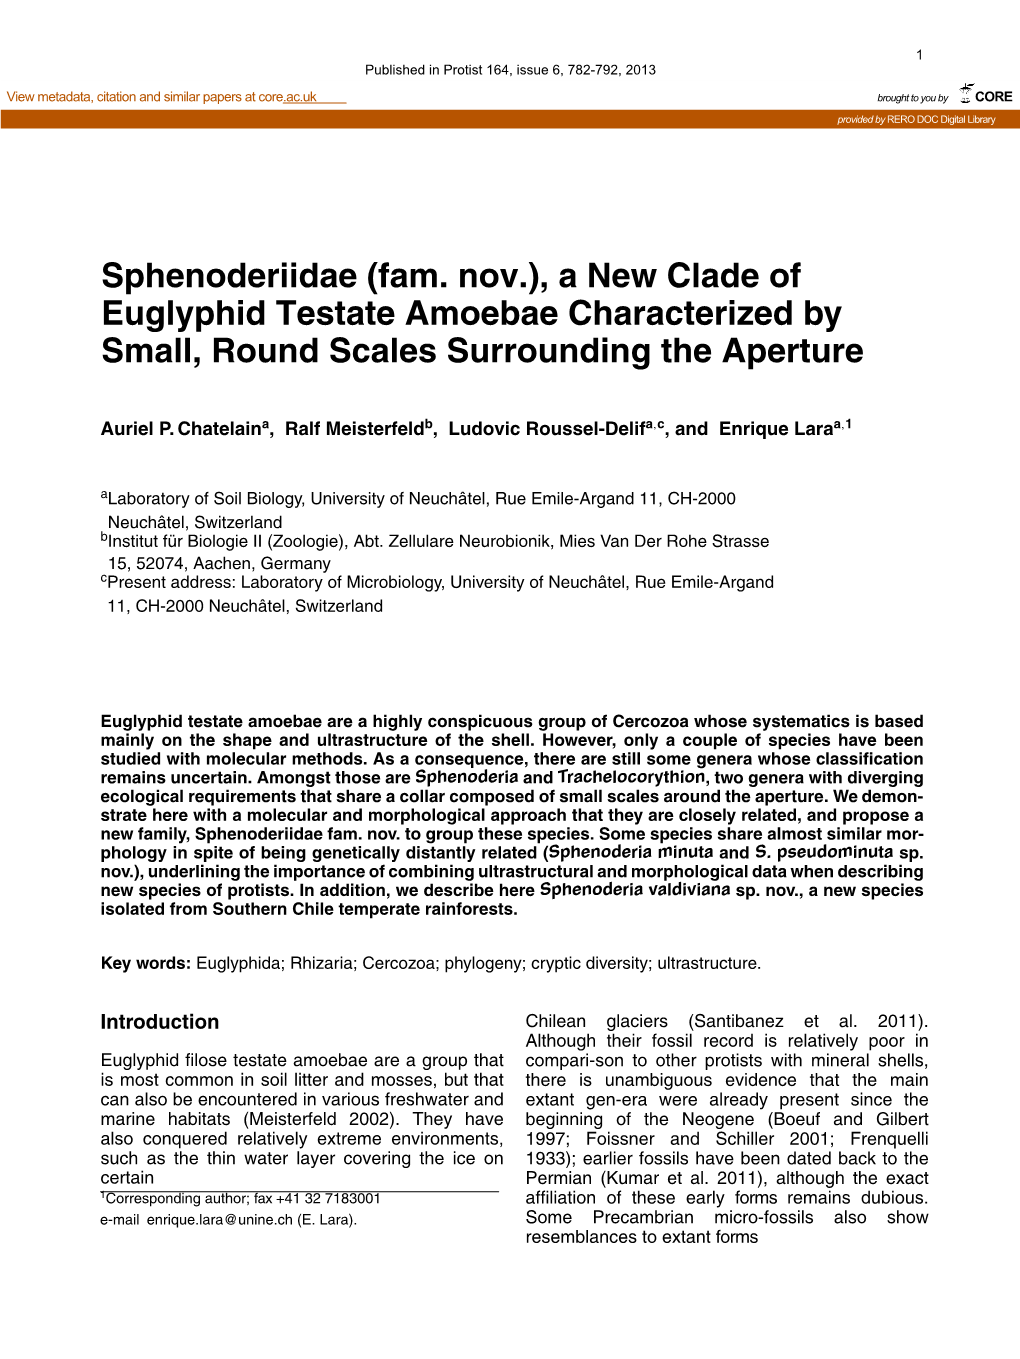 Sphenoderiidae (Fam. Nov.), a New Clade of Euglyphid Testate Amoebae Characterized by Small, Round Scales Surrounding the Aperture